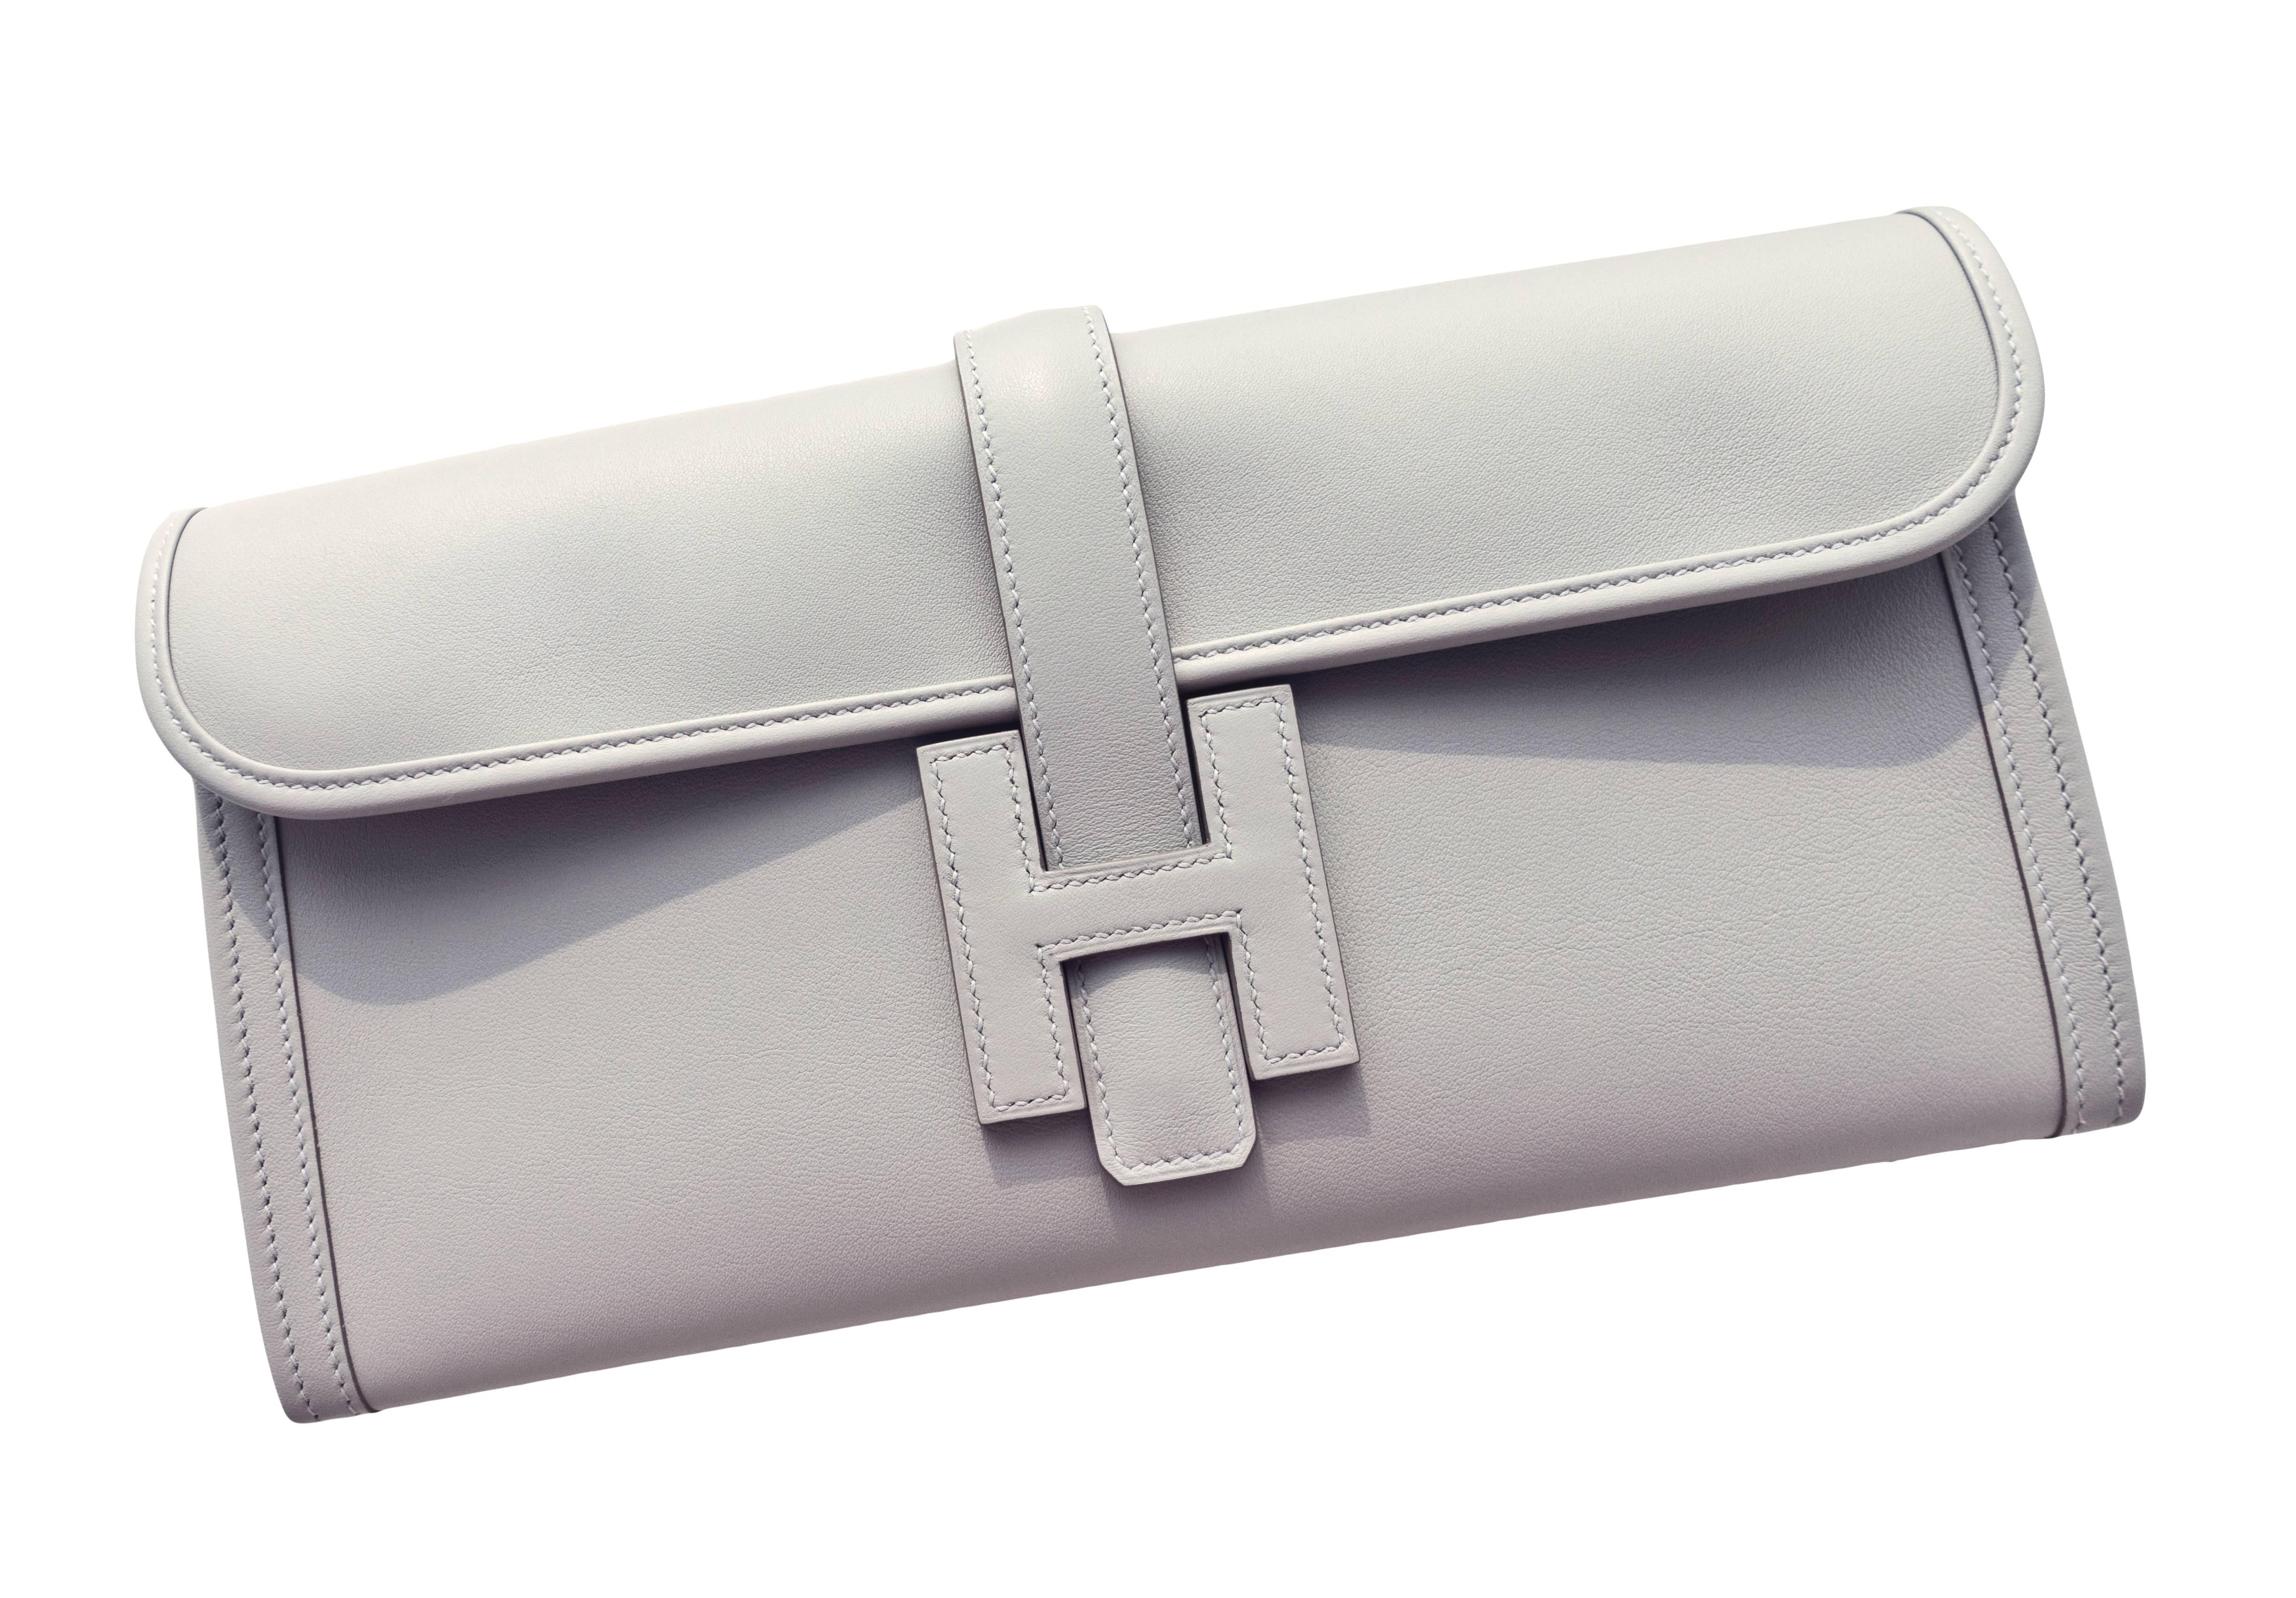 Hermes Gris Perle Light Pearl Grey Jige Elan Clutch 29cm Elegant
Perfect Gift! Brand New in Box
Pristine condition.  2016 store fresh bag with interior X stamp.
Comes in full set with Hermes dust bag, Hermes ribbon, and Hermes box.
Gris Perle or